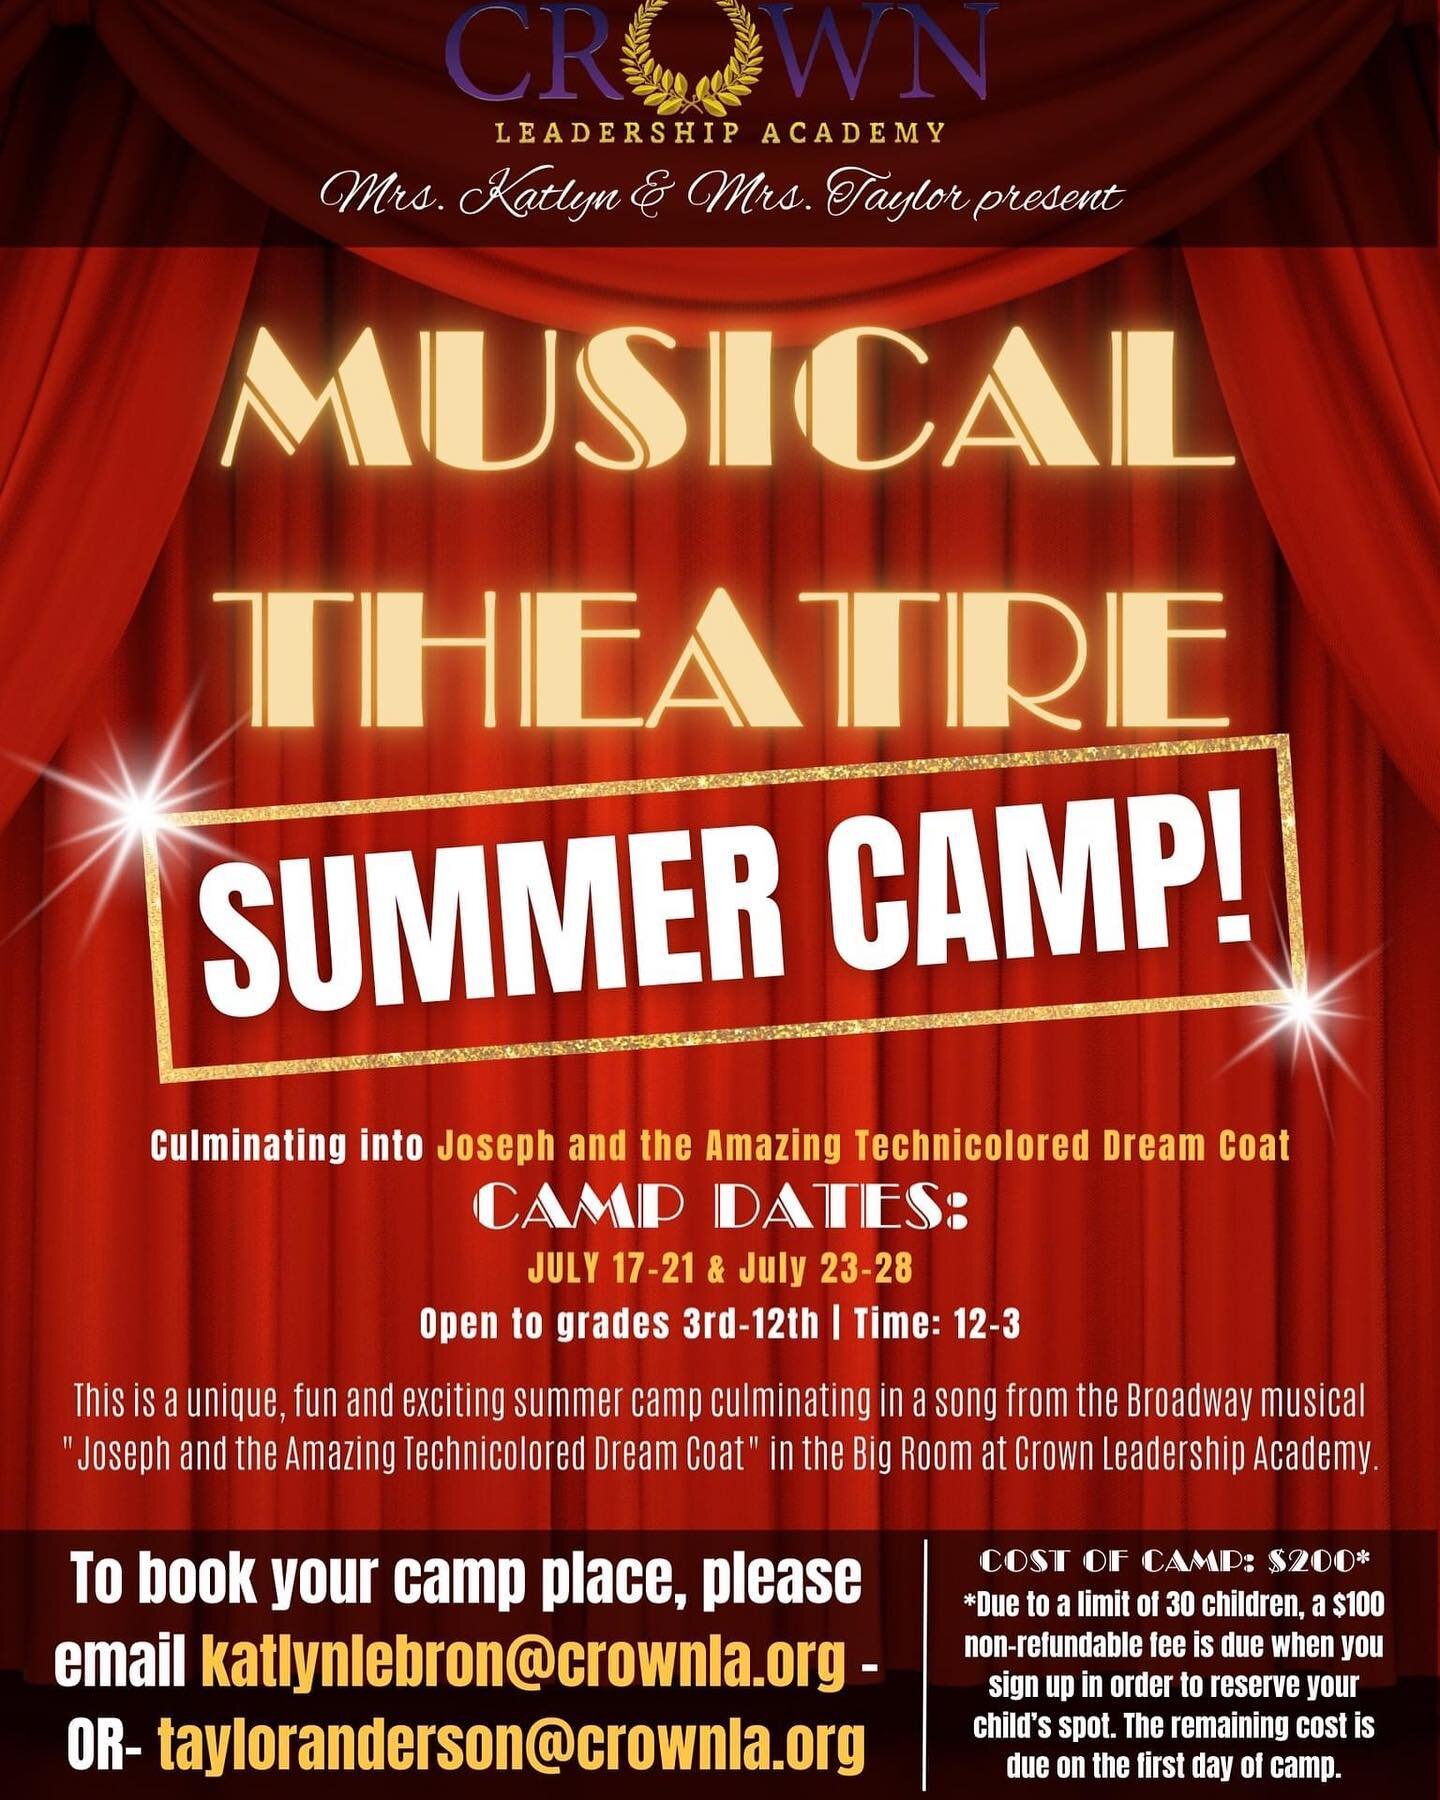 Looking for a Summer Camp? Check out this new Musical Threatre Camp with Mrs. Katlyn &amp; Mrs. Taylor! 

#CrownLeadership #MusicalTheatre #ChristianSchool #Charleston #Summer2023 #MtPleasantSc #Theatre